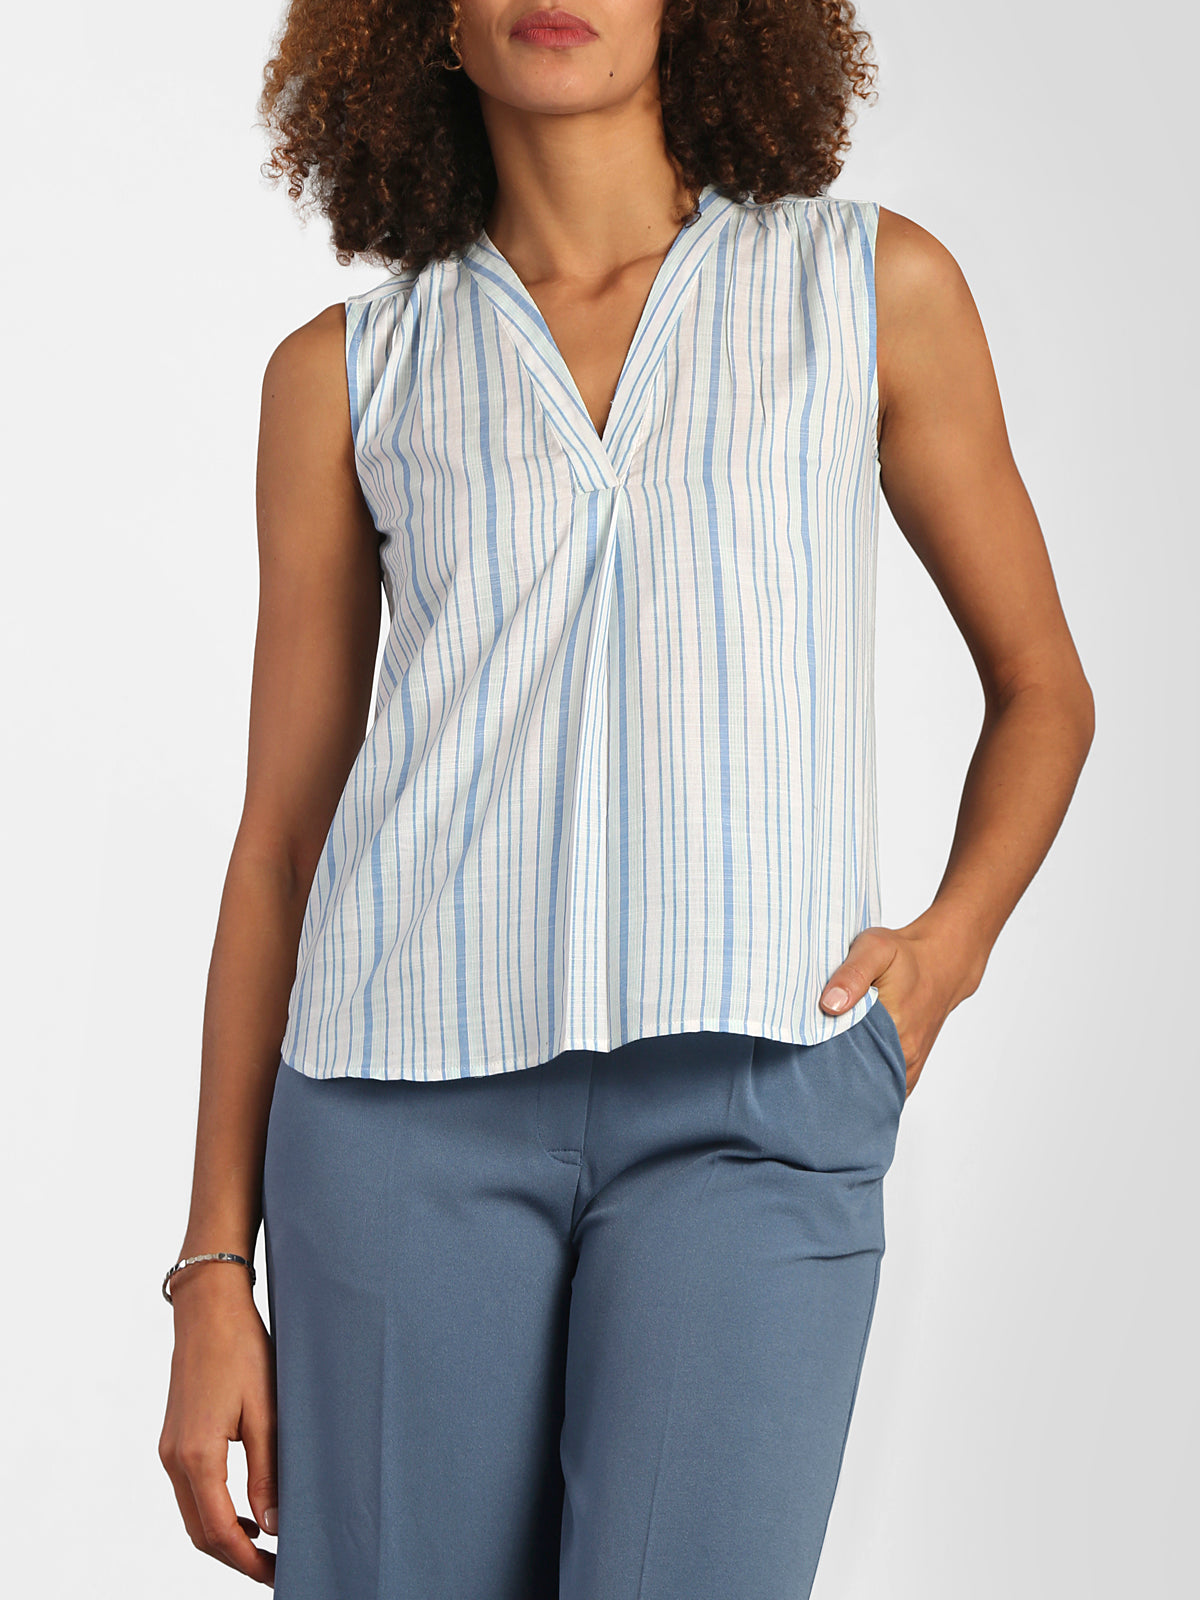 V Neck Striped Top - Blue and White